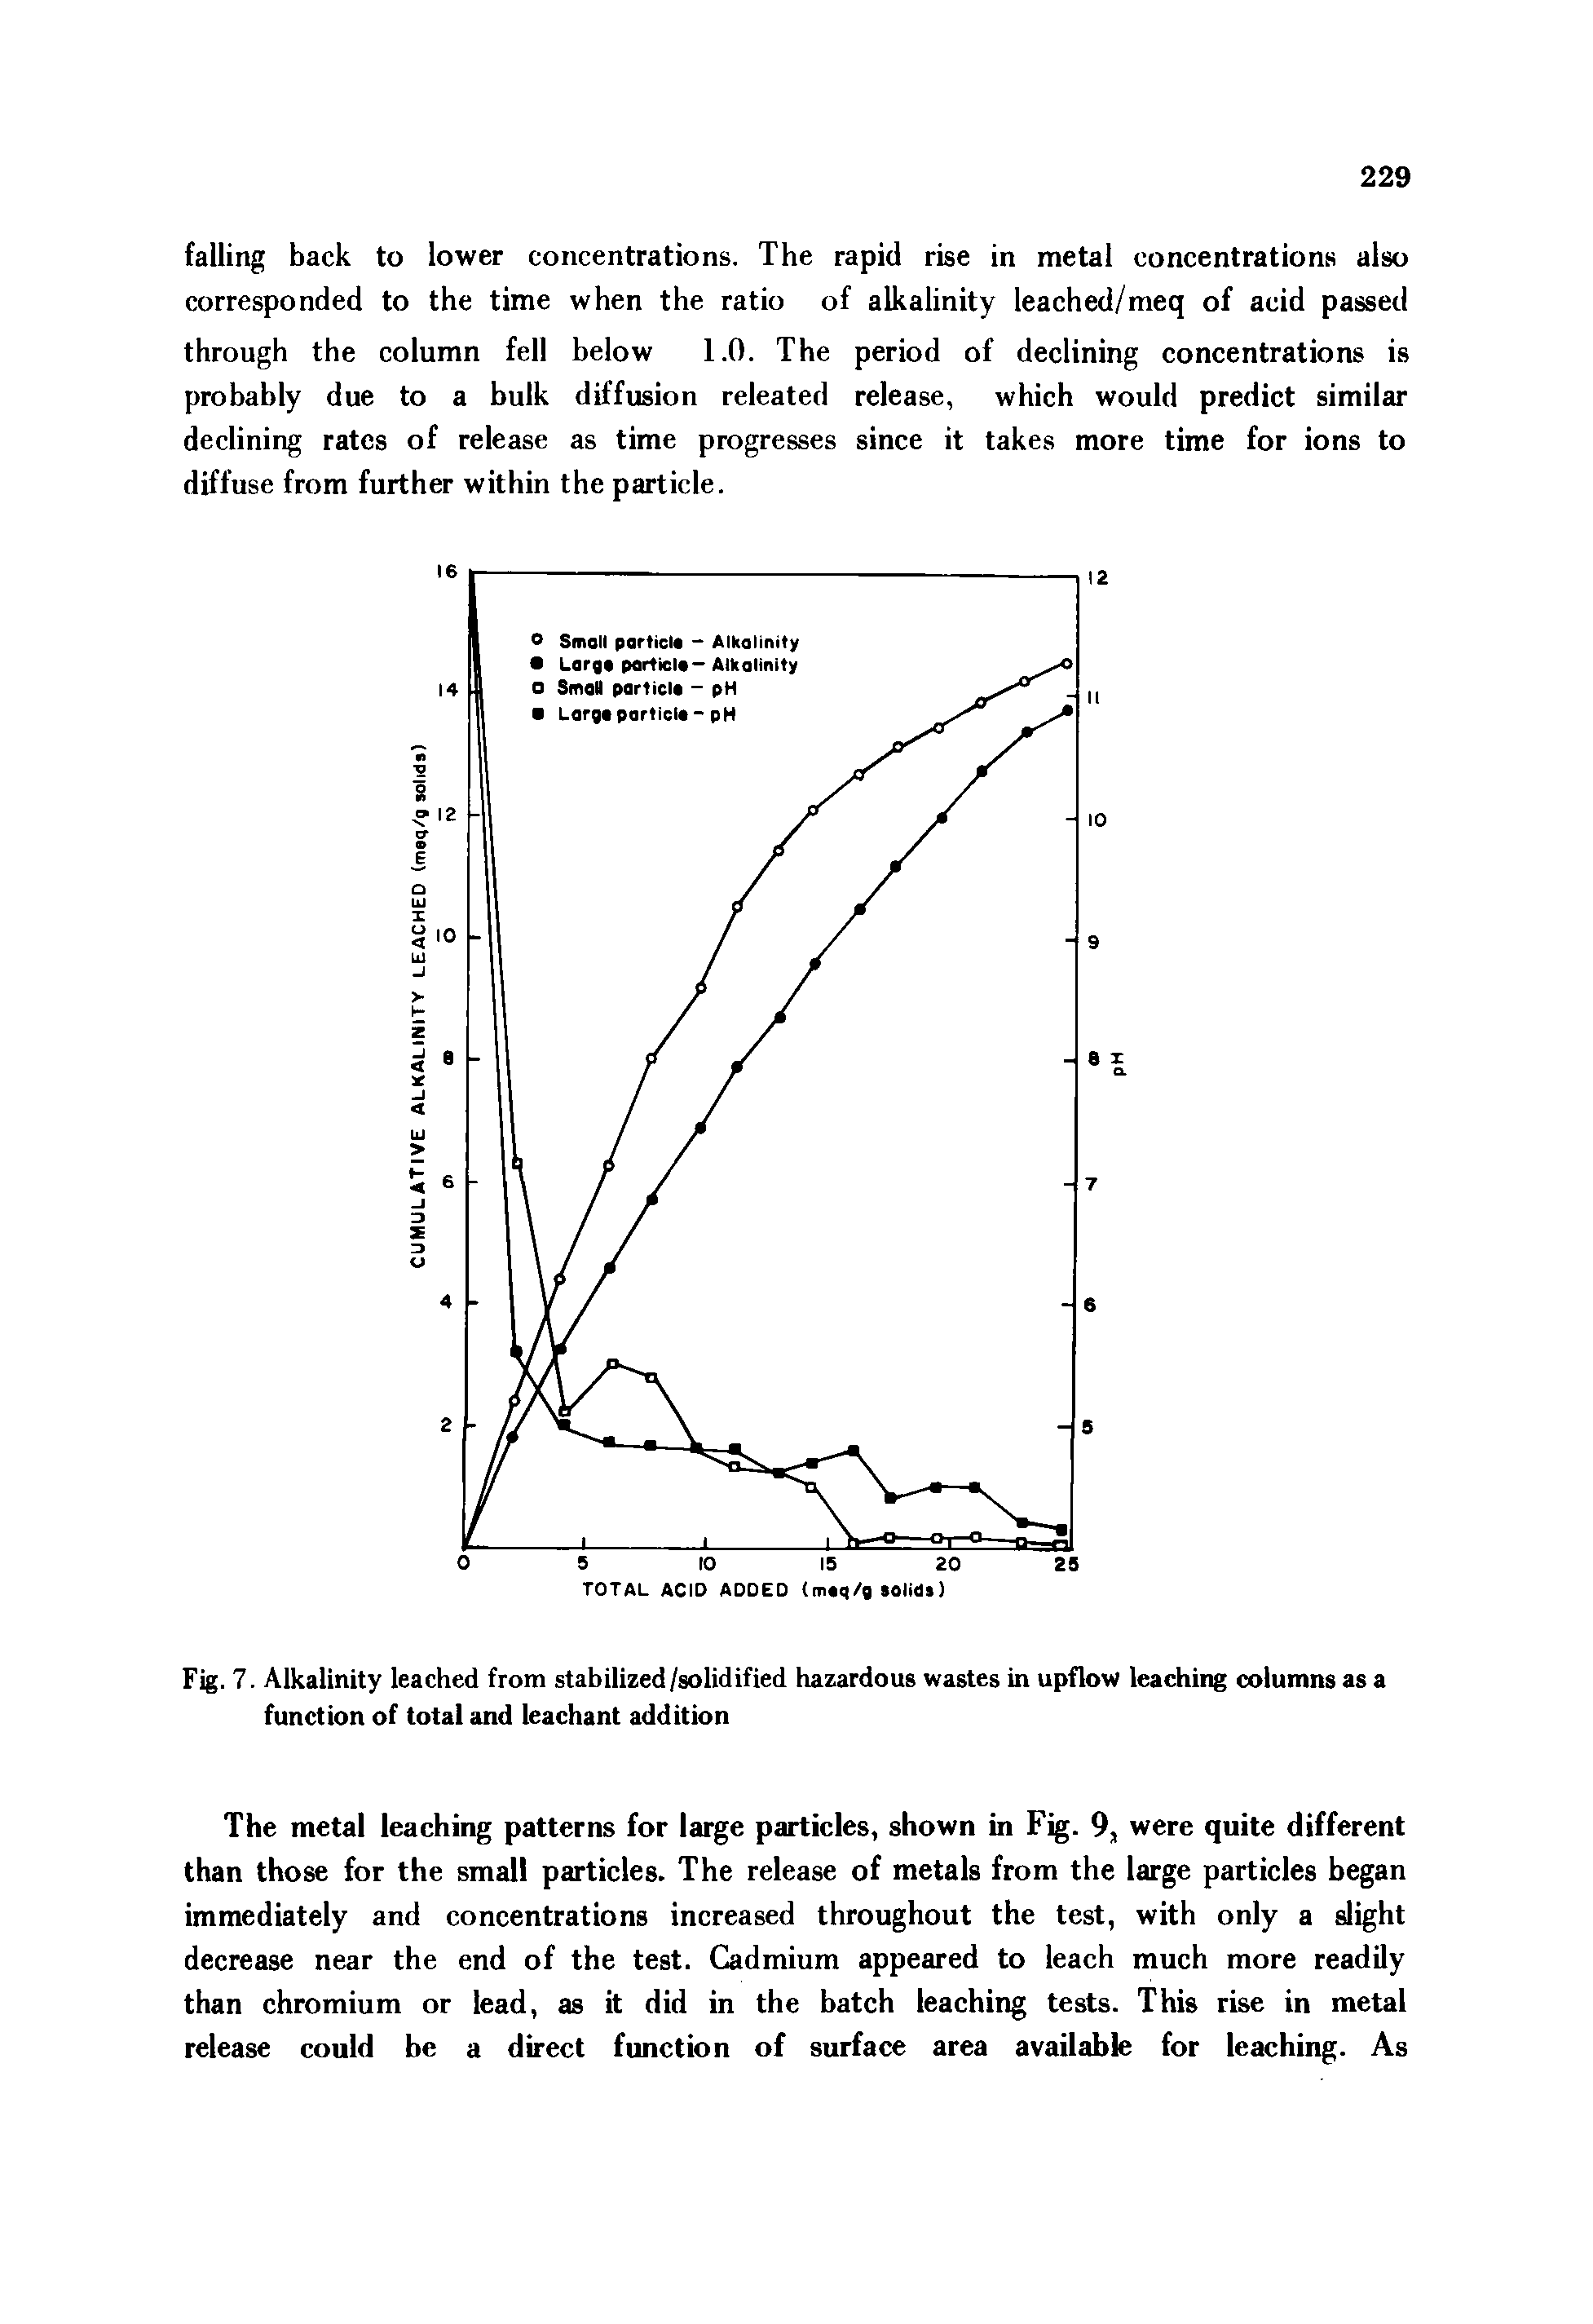 Fig. 7. Alkalinity leached from stabilized/solidified hazardous wastes in upflow leaching columns as a function of total and leachant addition...